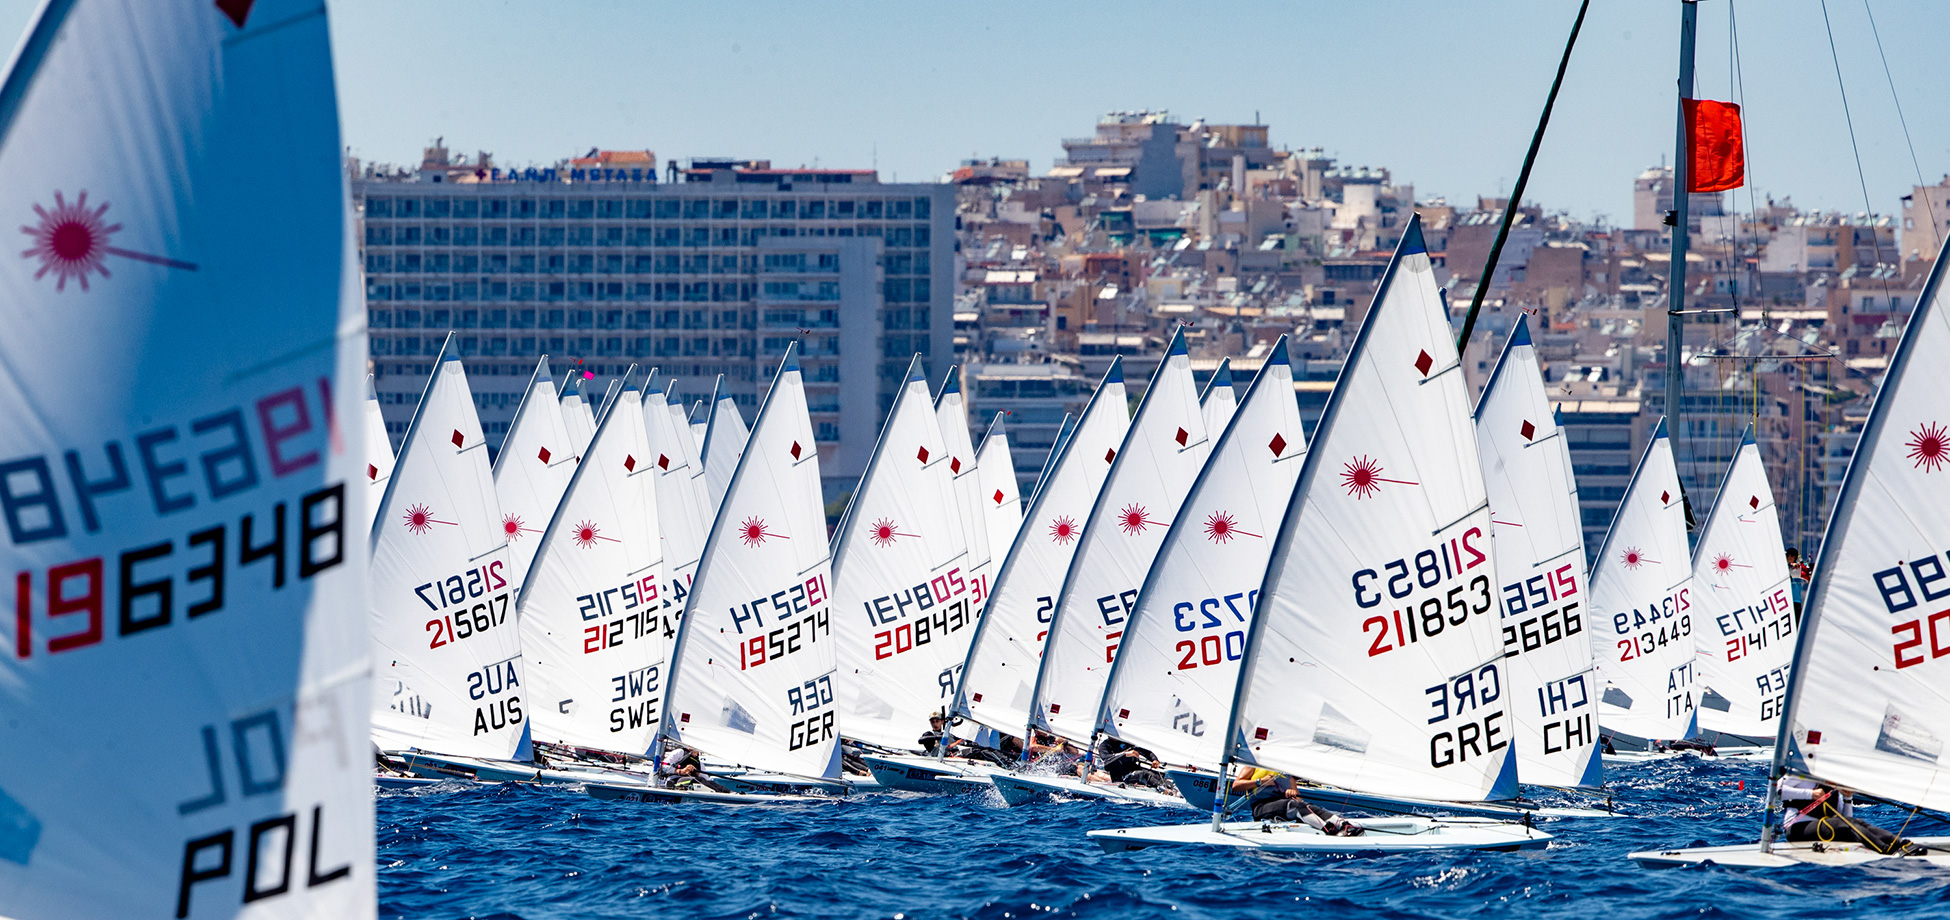 radial youth europeans day 2